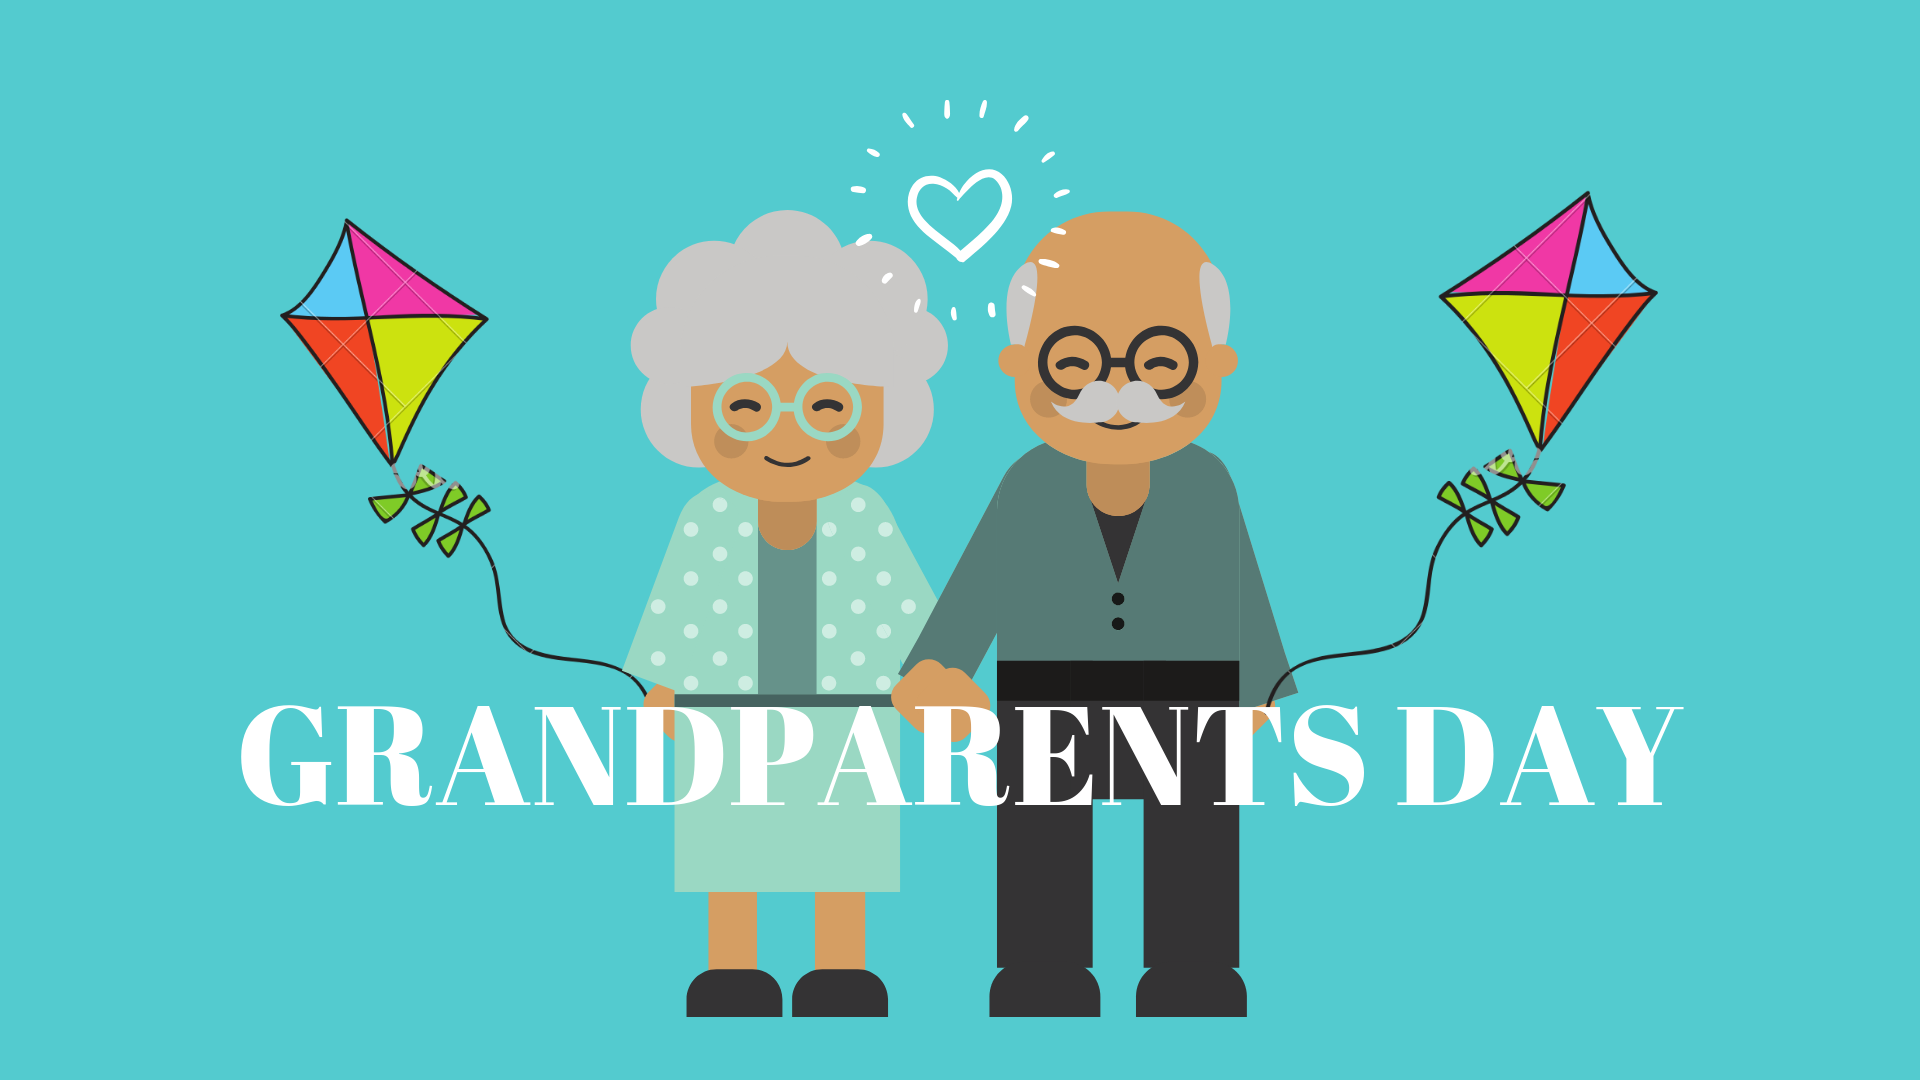 Download National Grand Parents Day 2020 In India Quotes Whatsapp Dp Status Images Wishes Sms